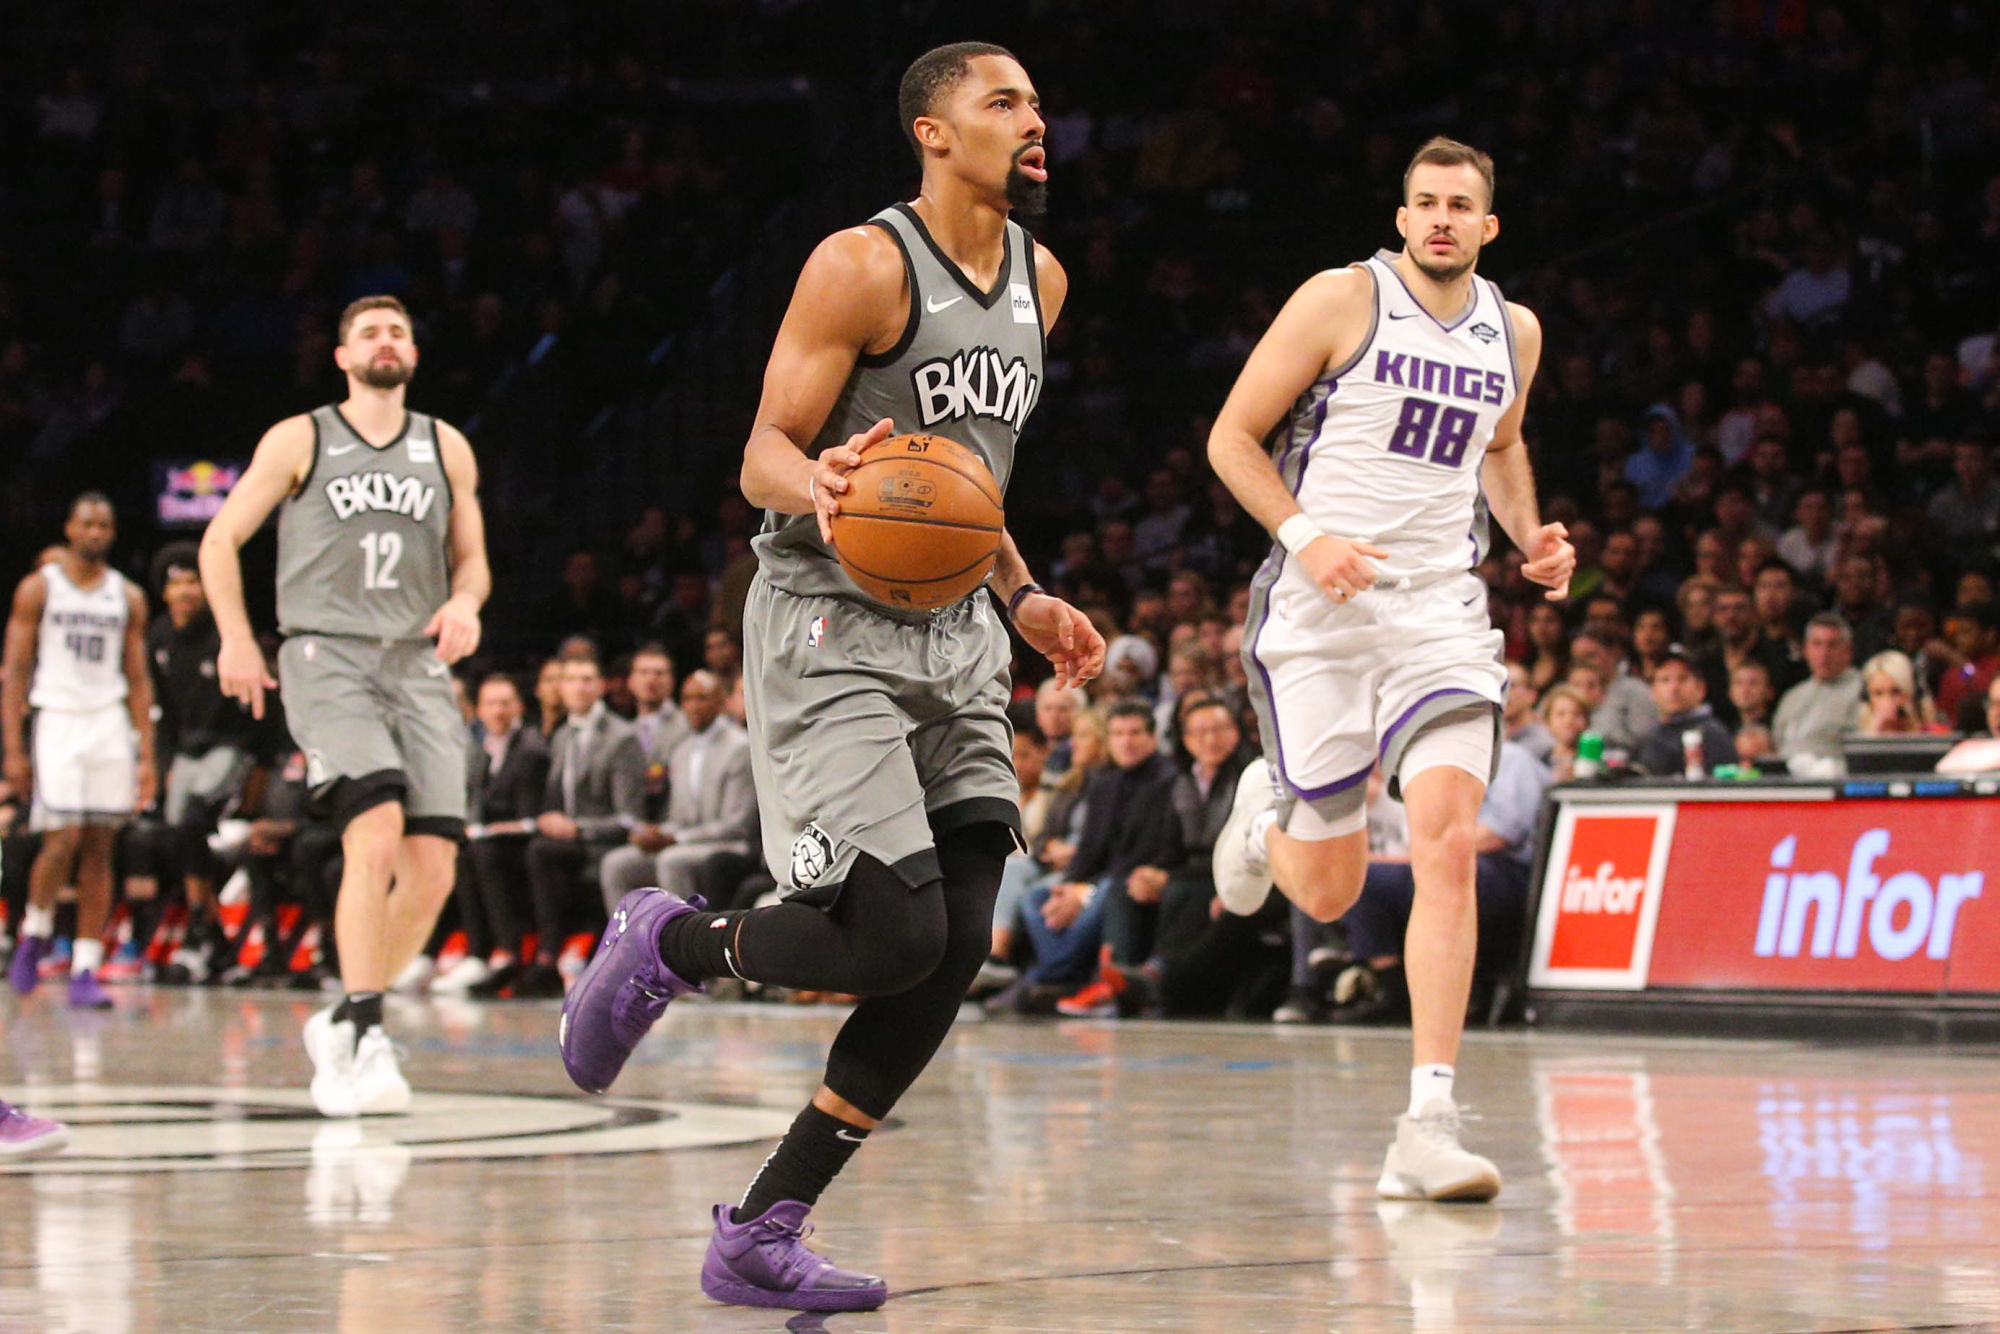 Nov 22, 2019; Brooklyn, NY, USA; Brooklyn Nets point guard Spencer Dinwiddie (8) drives to the basket against Sacramento Kings power forward Nemanja Bjelica (88) during the fourth quarter at Barclays Center. Mandatory Credit: Brad Penner-USA TODAY Sports/Sipa USA 

Photo by Icon Sport - Nemanja BJELICA - Spencer DINWIDDIE - Barclays Center - New York (Etats Unis)